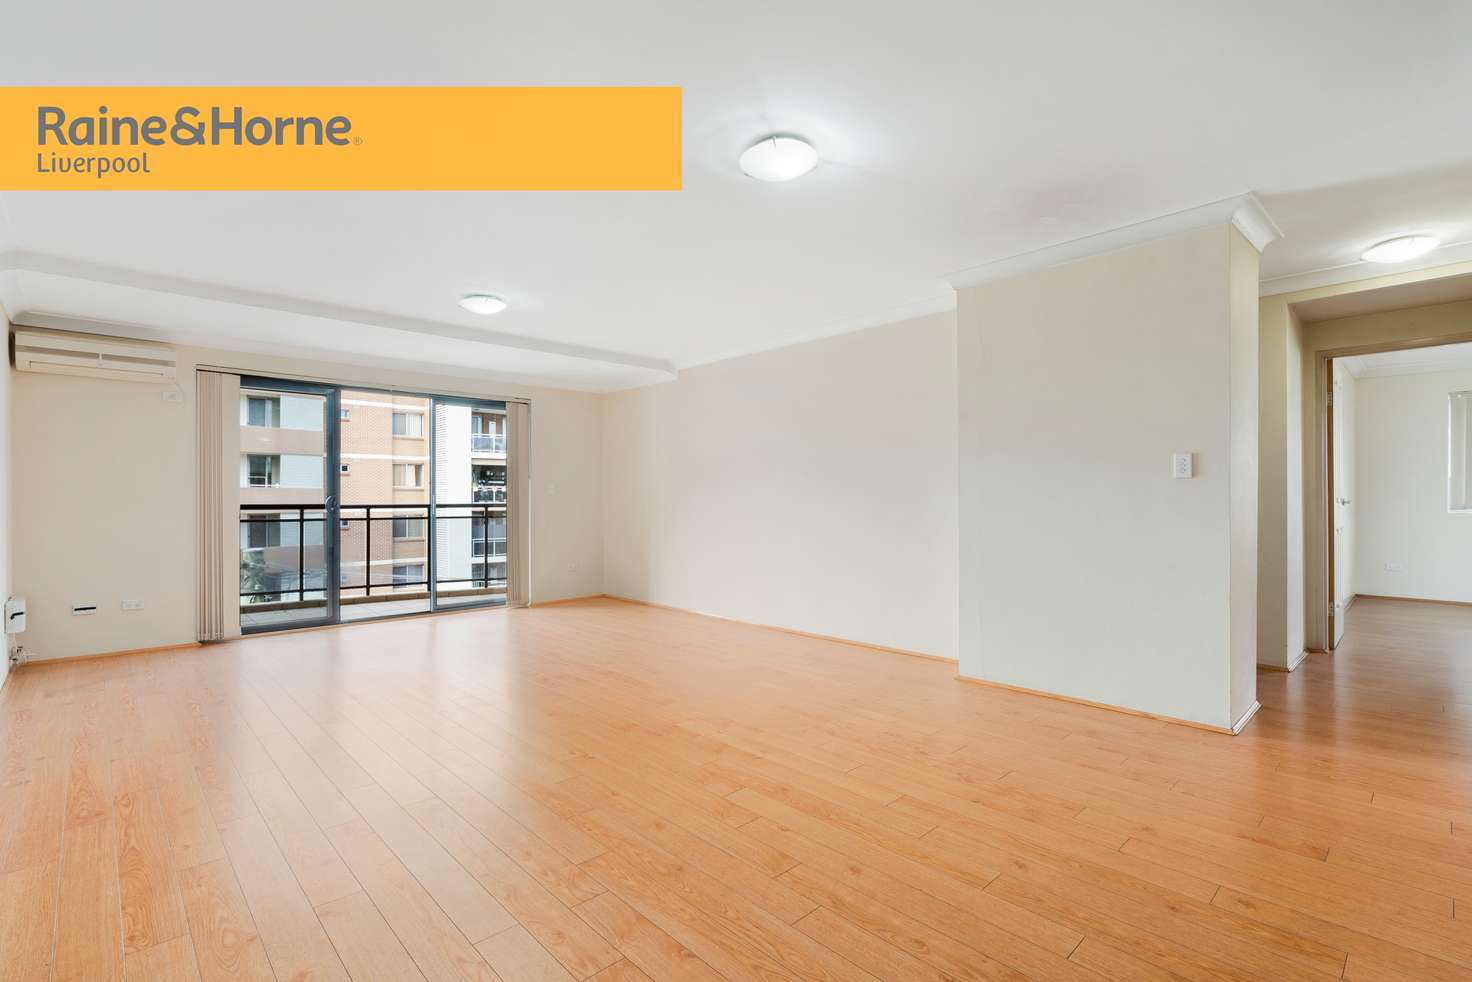 Main view of Homely apartment listing, 17/12-20 Lachlan Street, Liverpool NSW 2170